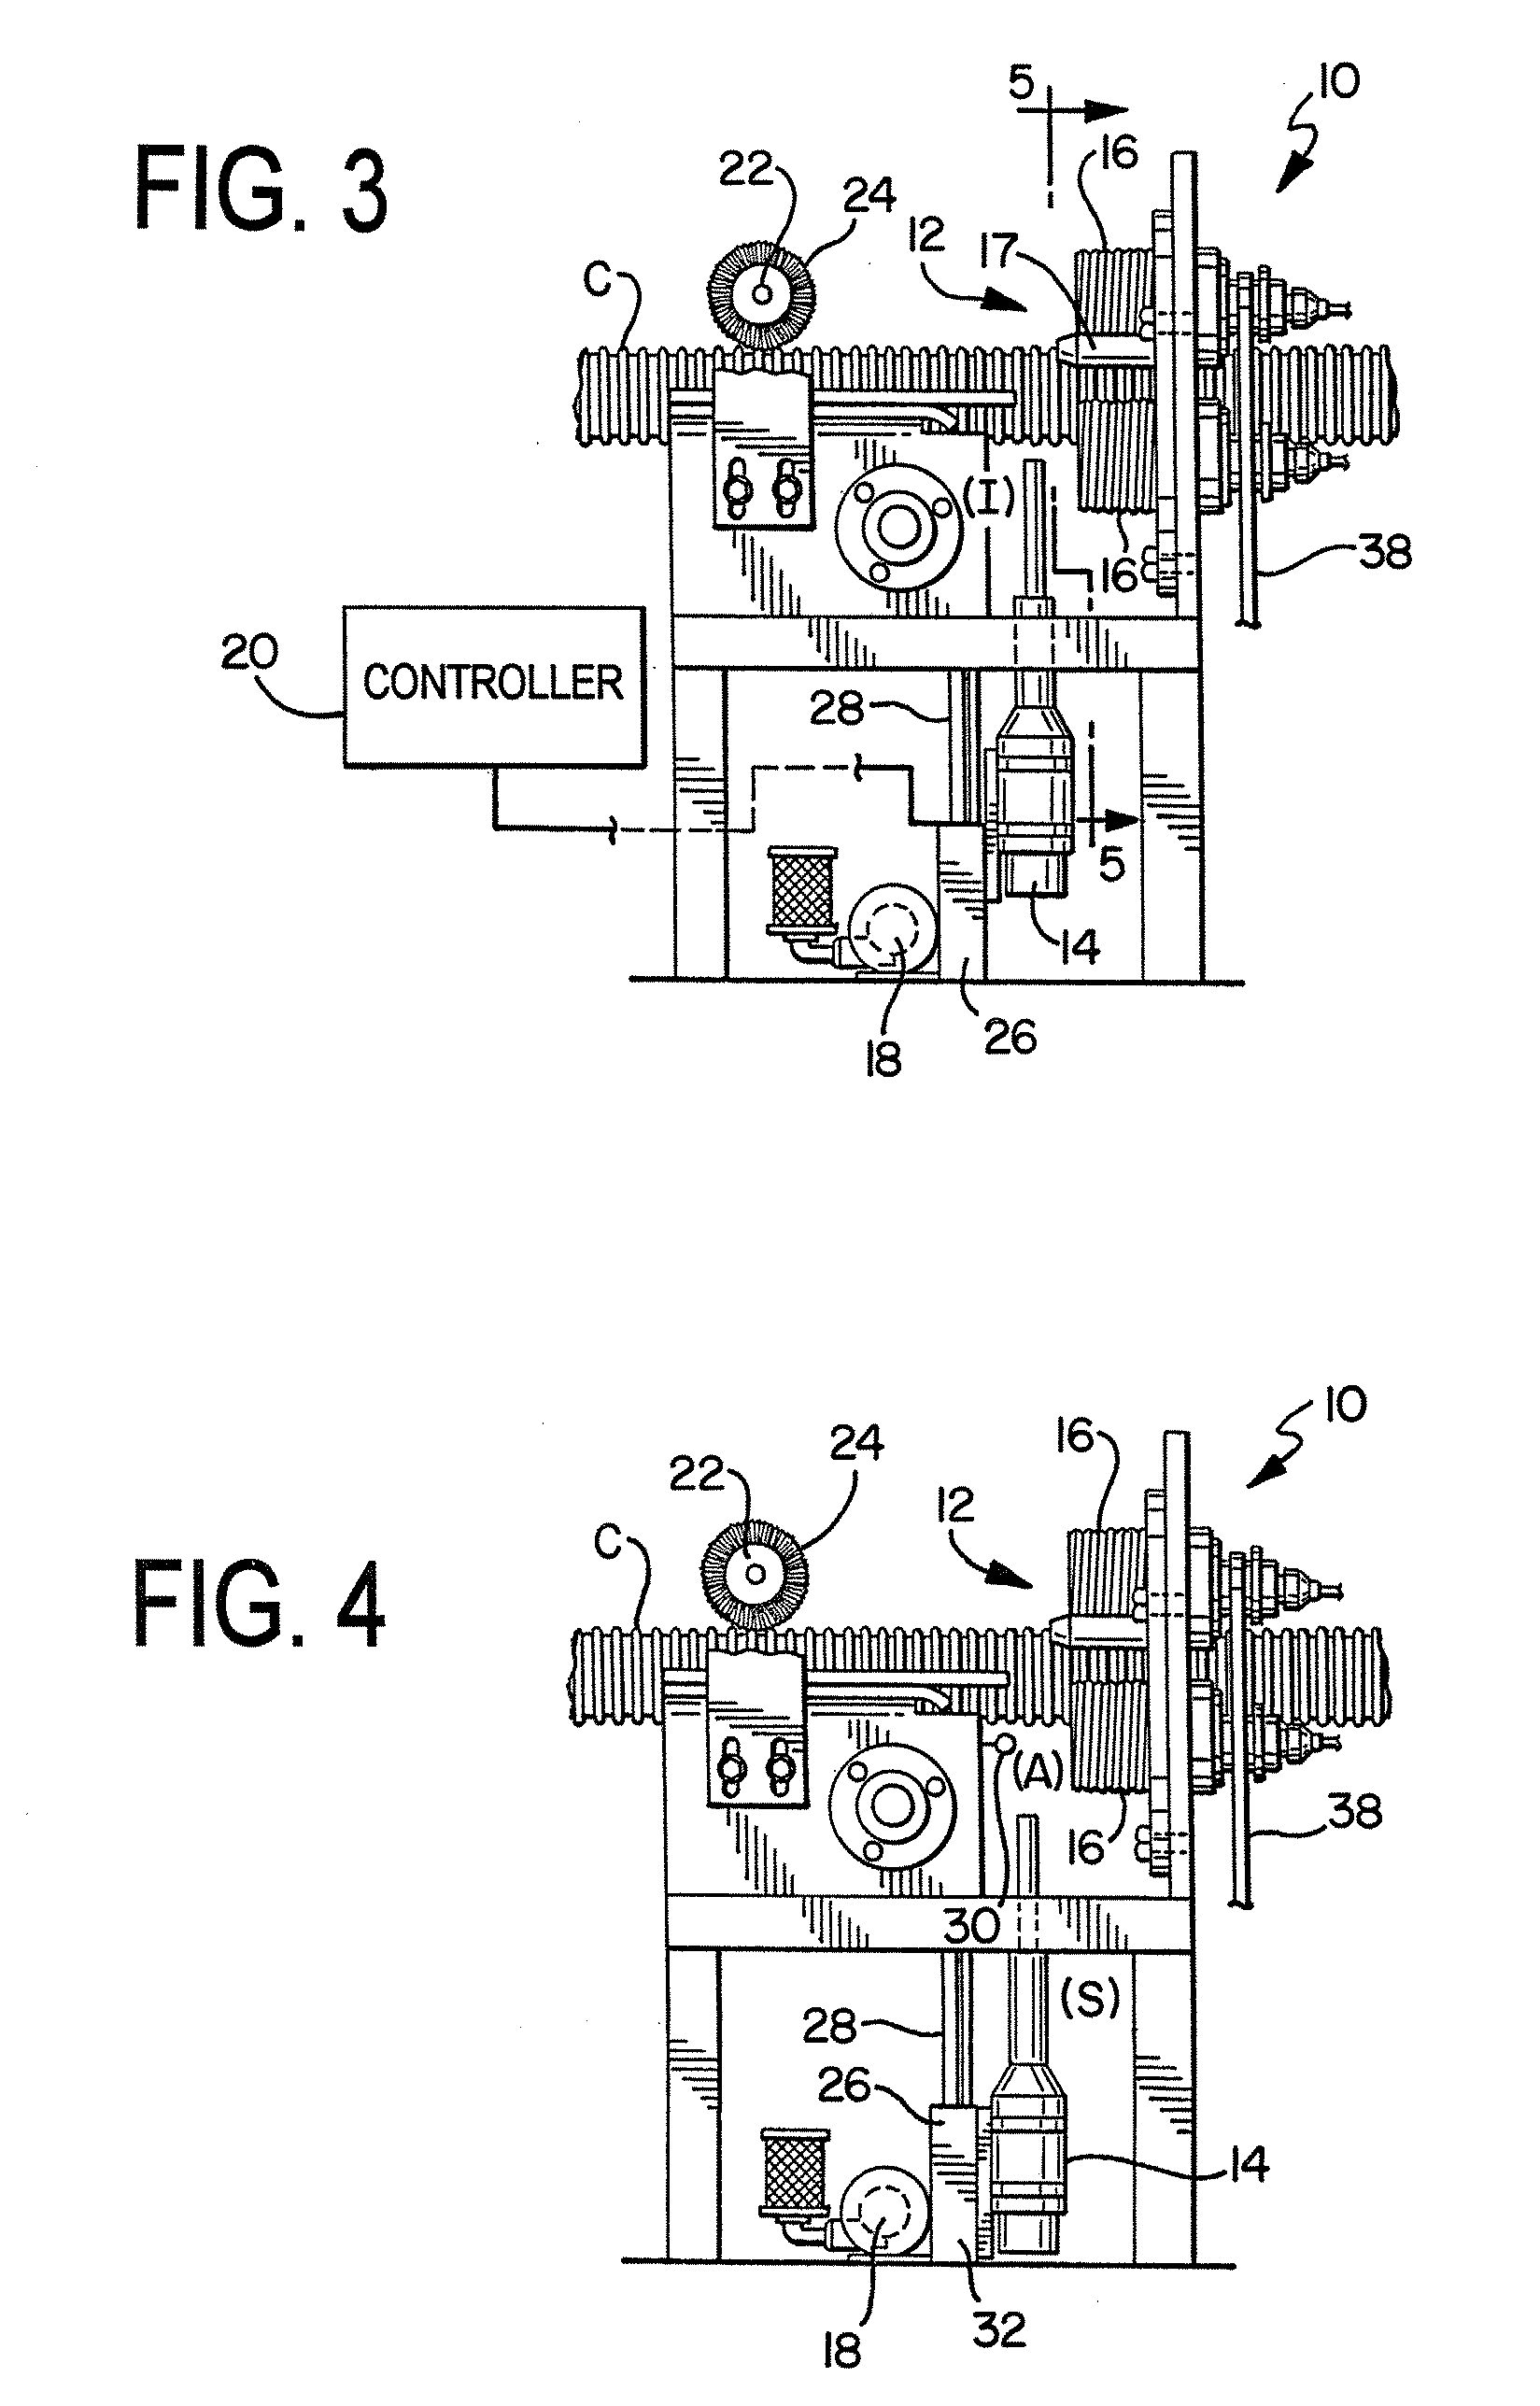 Apparatus for forming rolled lips on thermoplastic containers